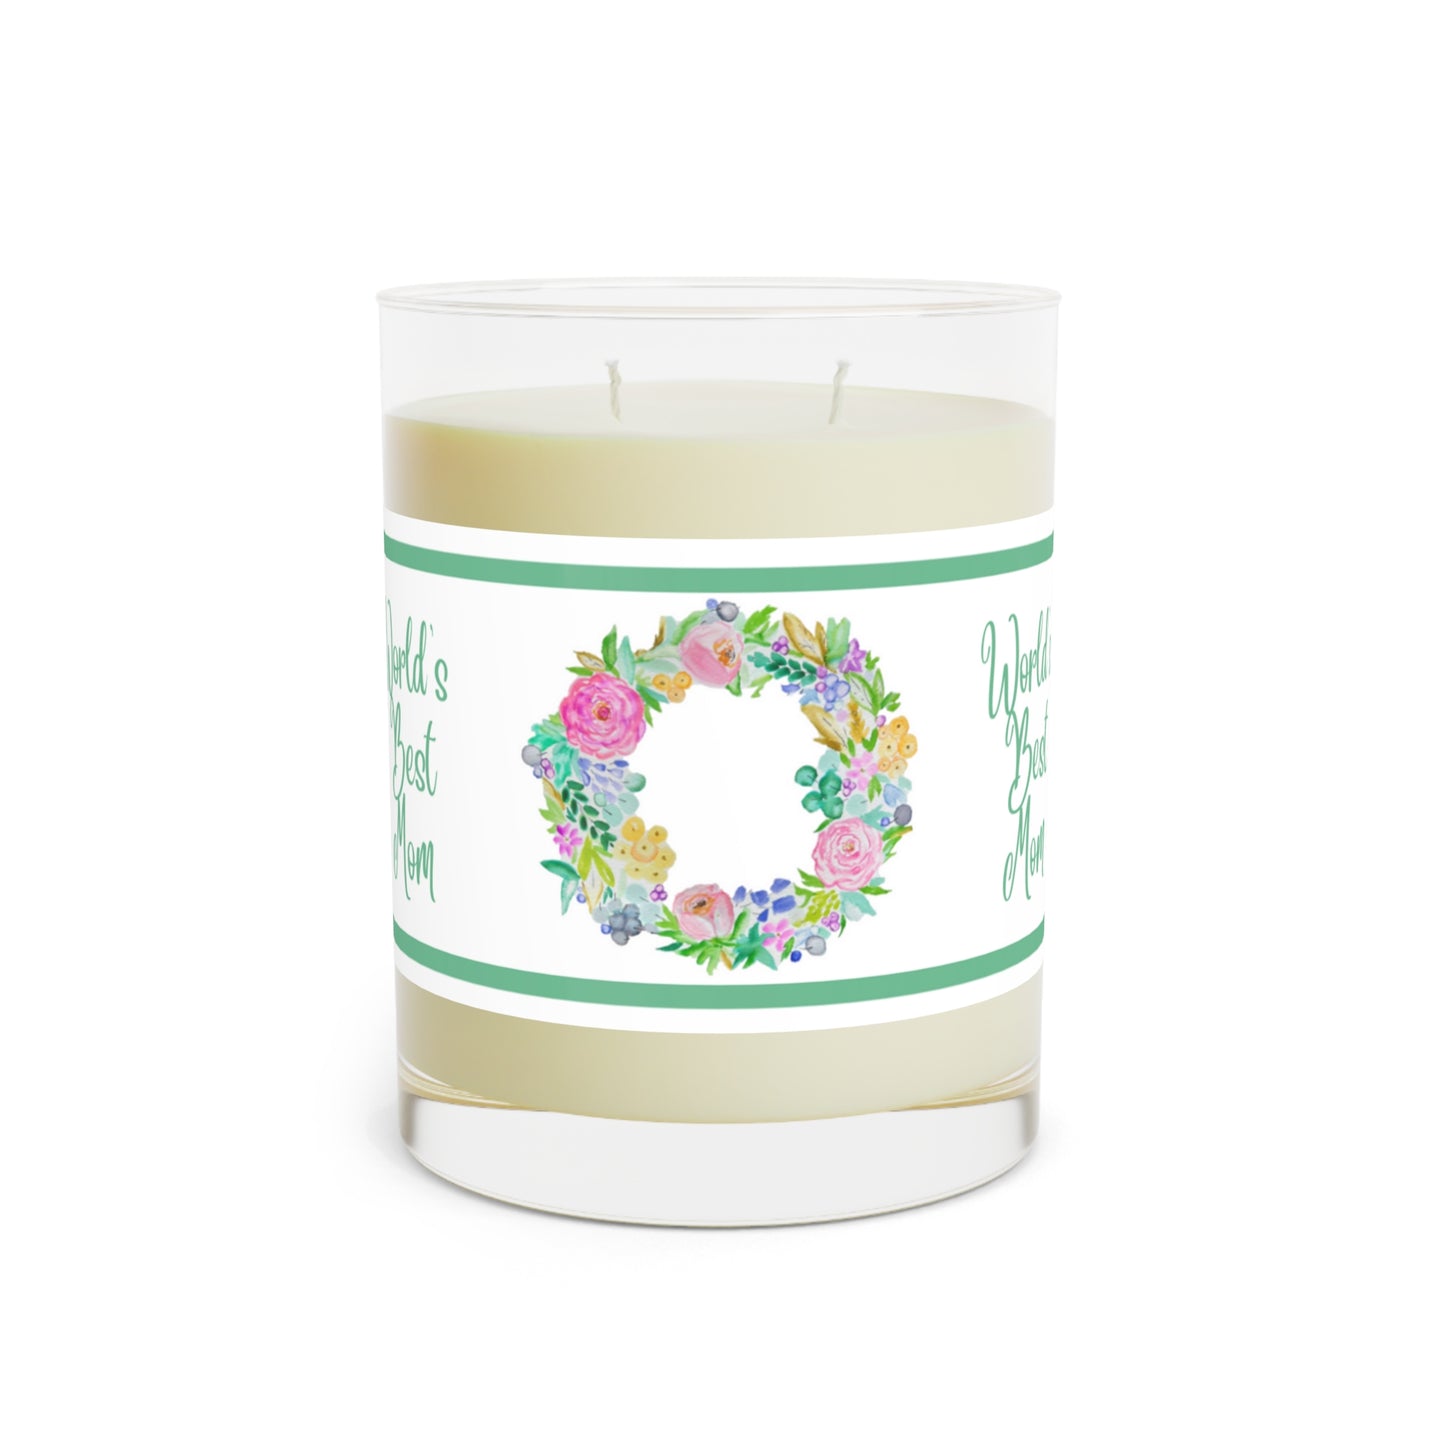 Wing Light Art Designs World's Best Mom Scented Candle - Full Glass, 11oz